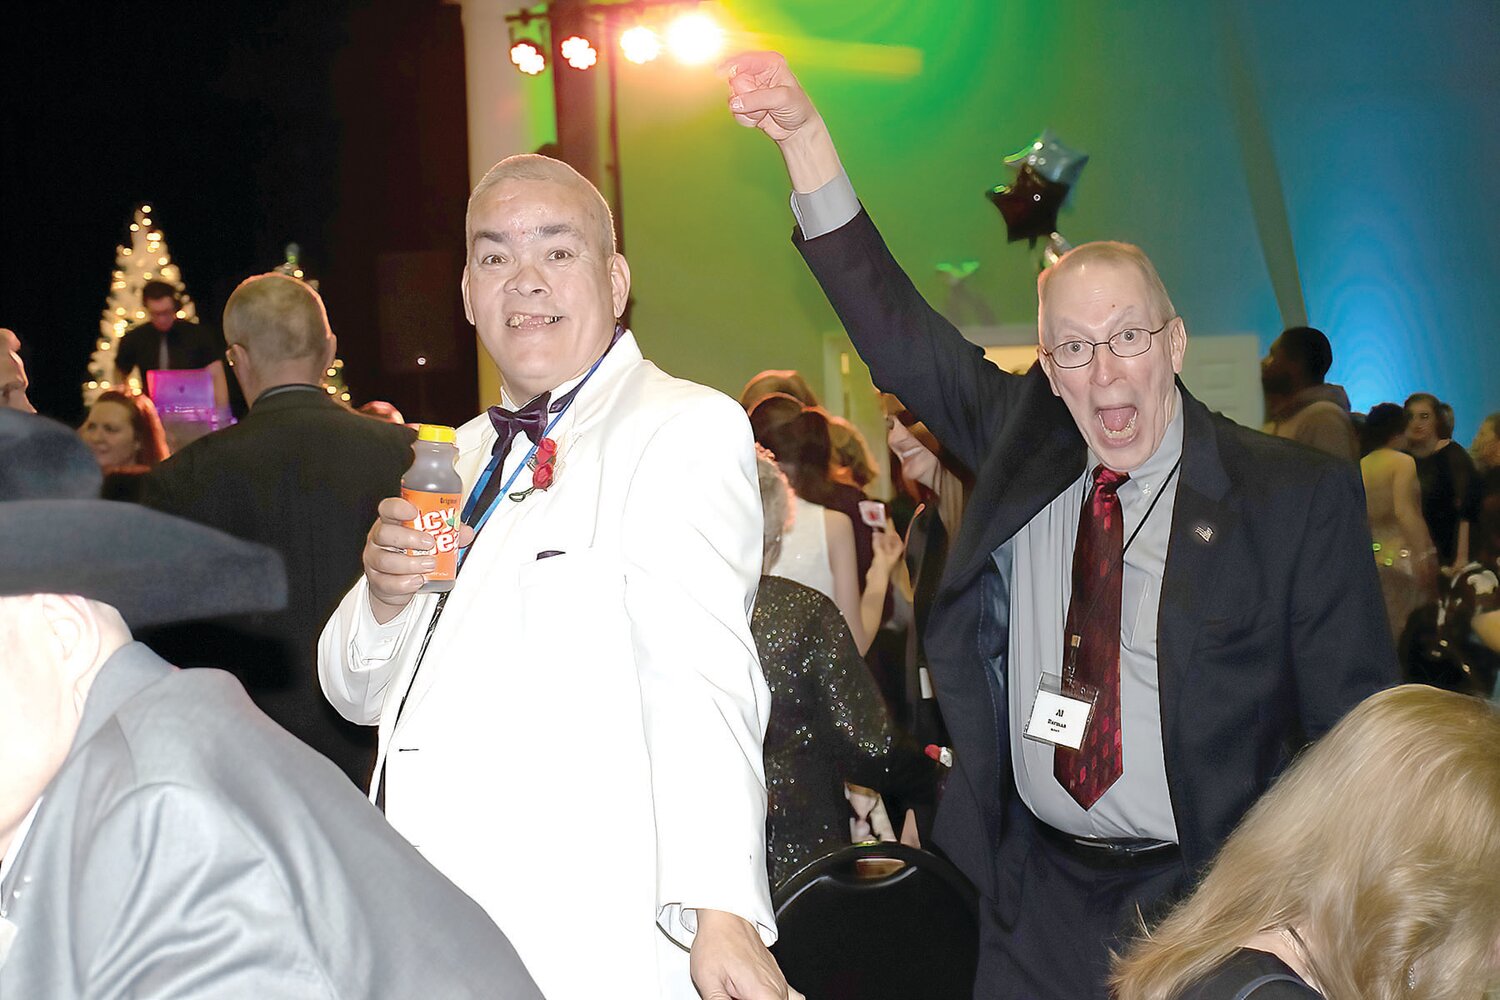 Carlos Stoltz and his Night to Shine buddy Al Herman show off their moves on the packed dance floor.